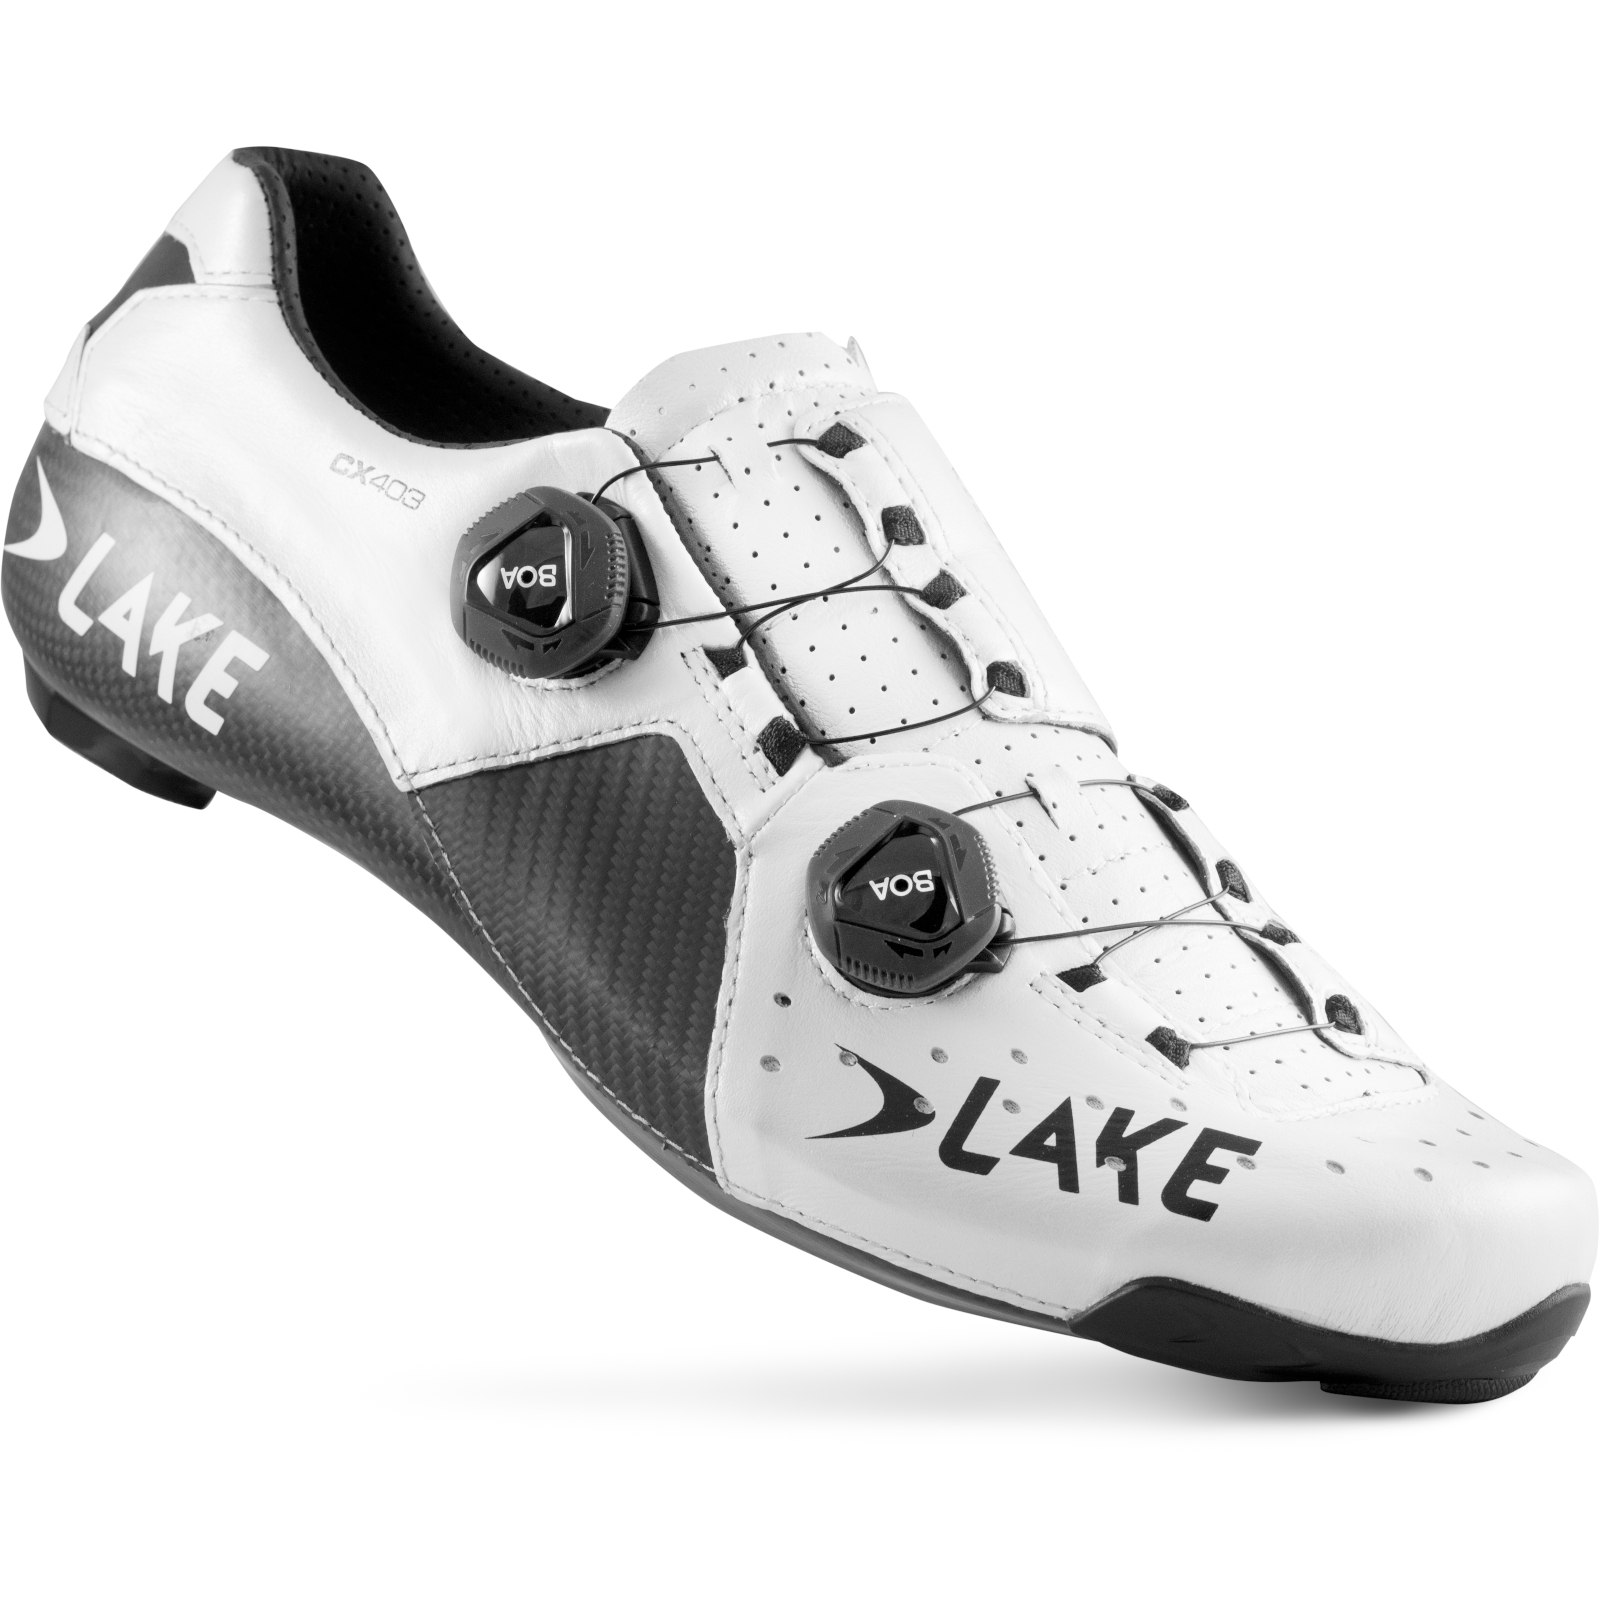 Picture of Lake CX403 SPDPLY Road Shoes - white/black